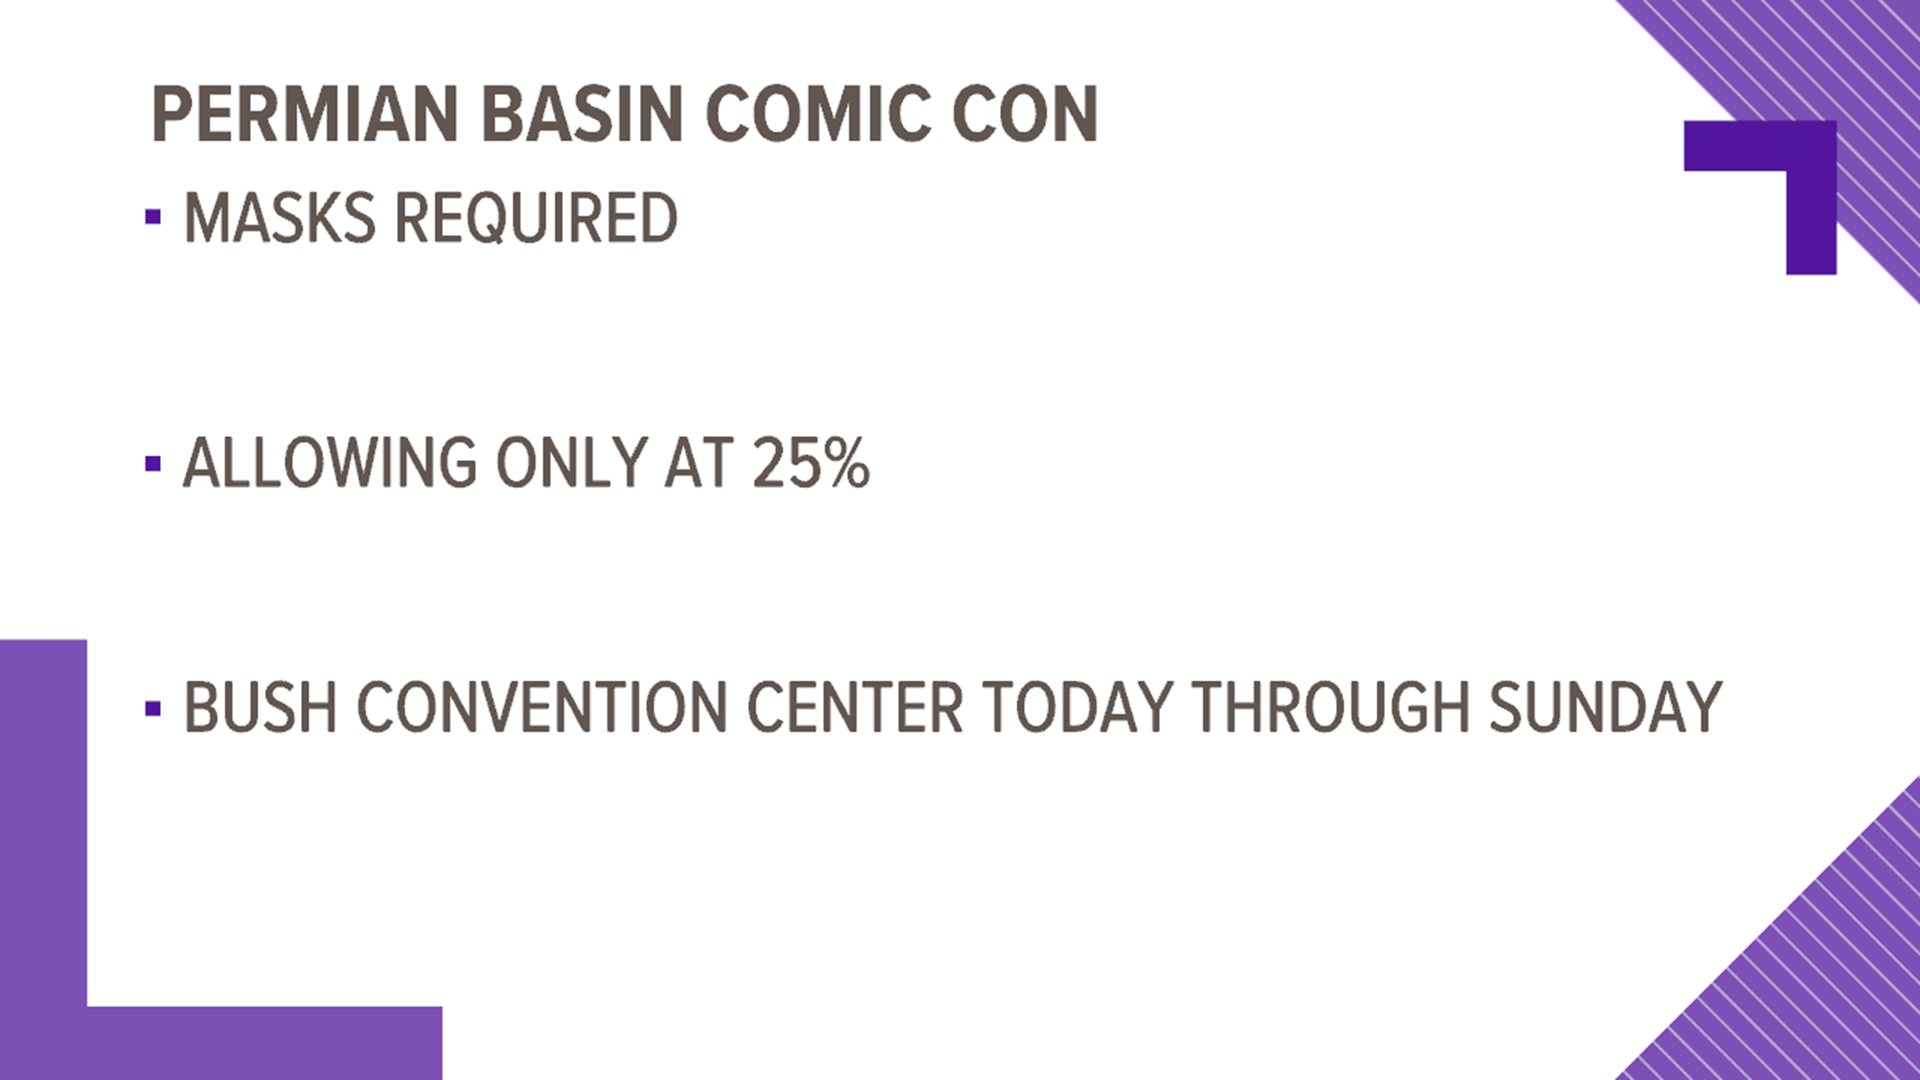 Comic Con was postponed due to the COVID-19 pandemic and is happening through Sunday, September 13.